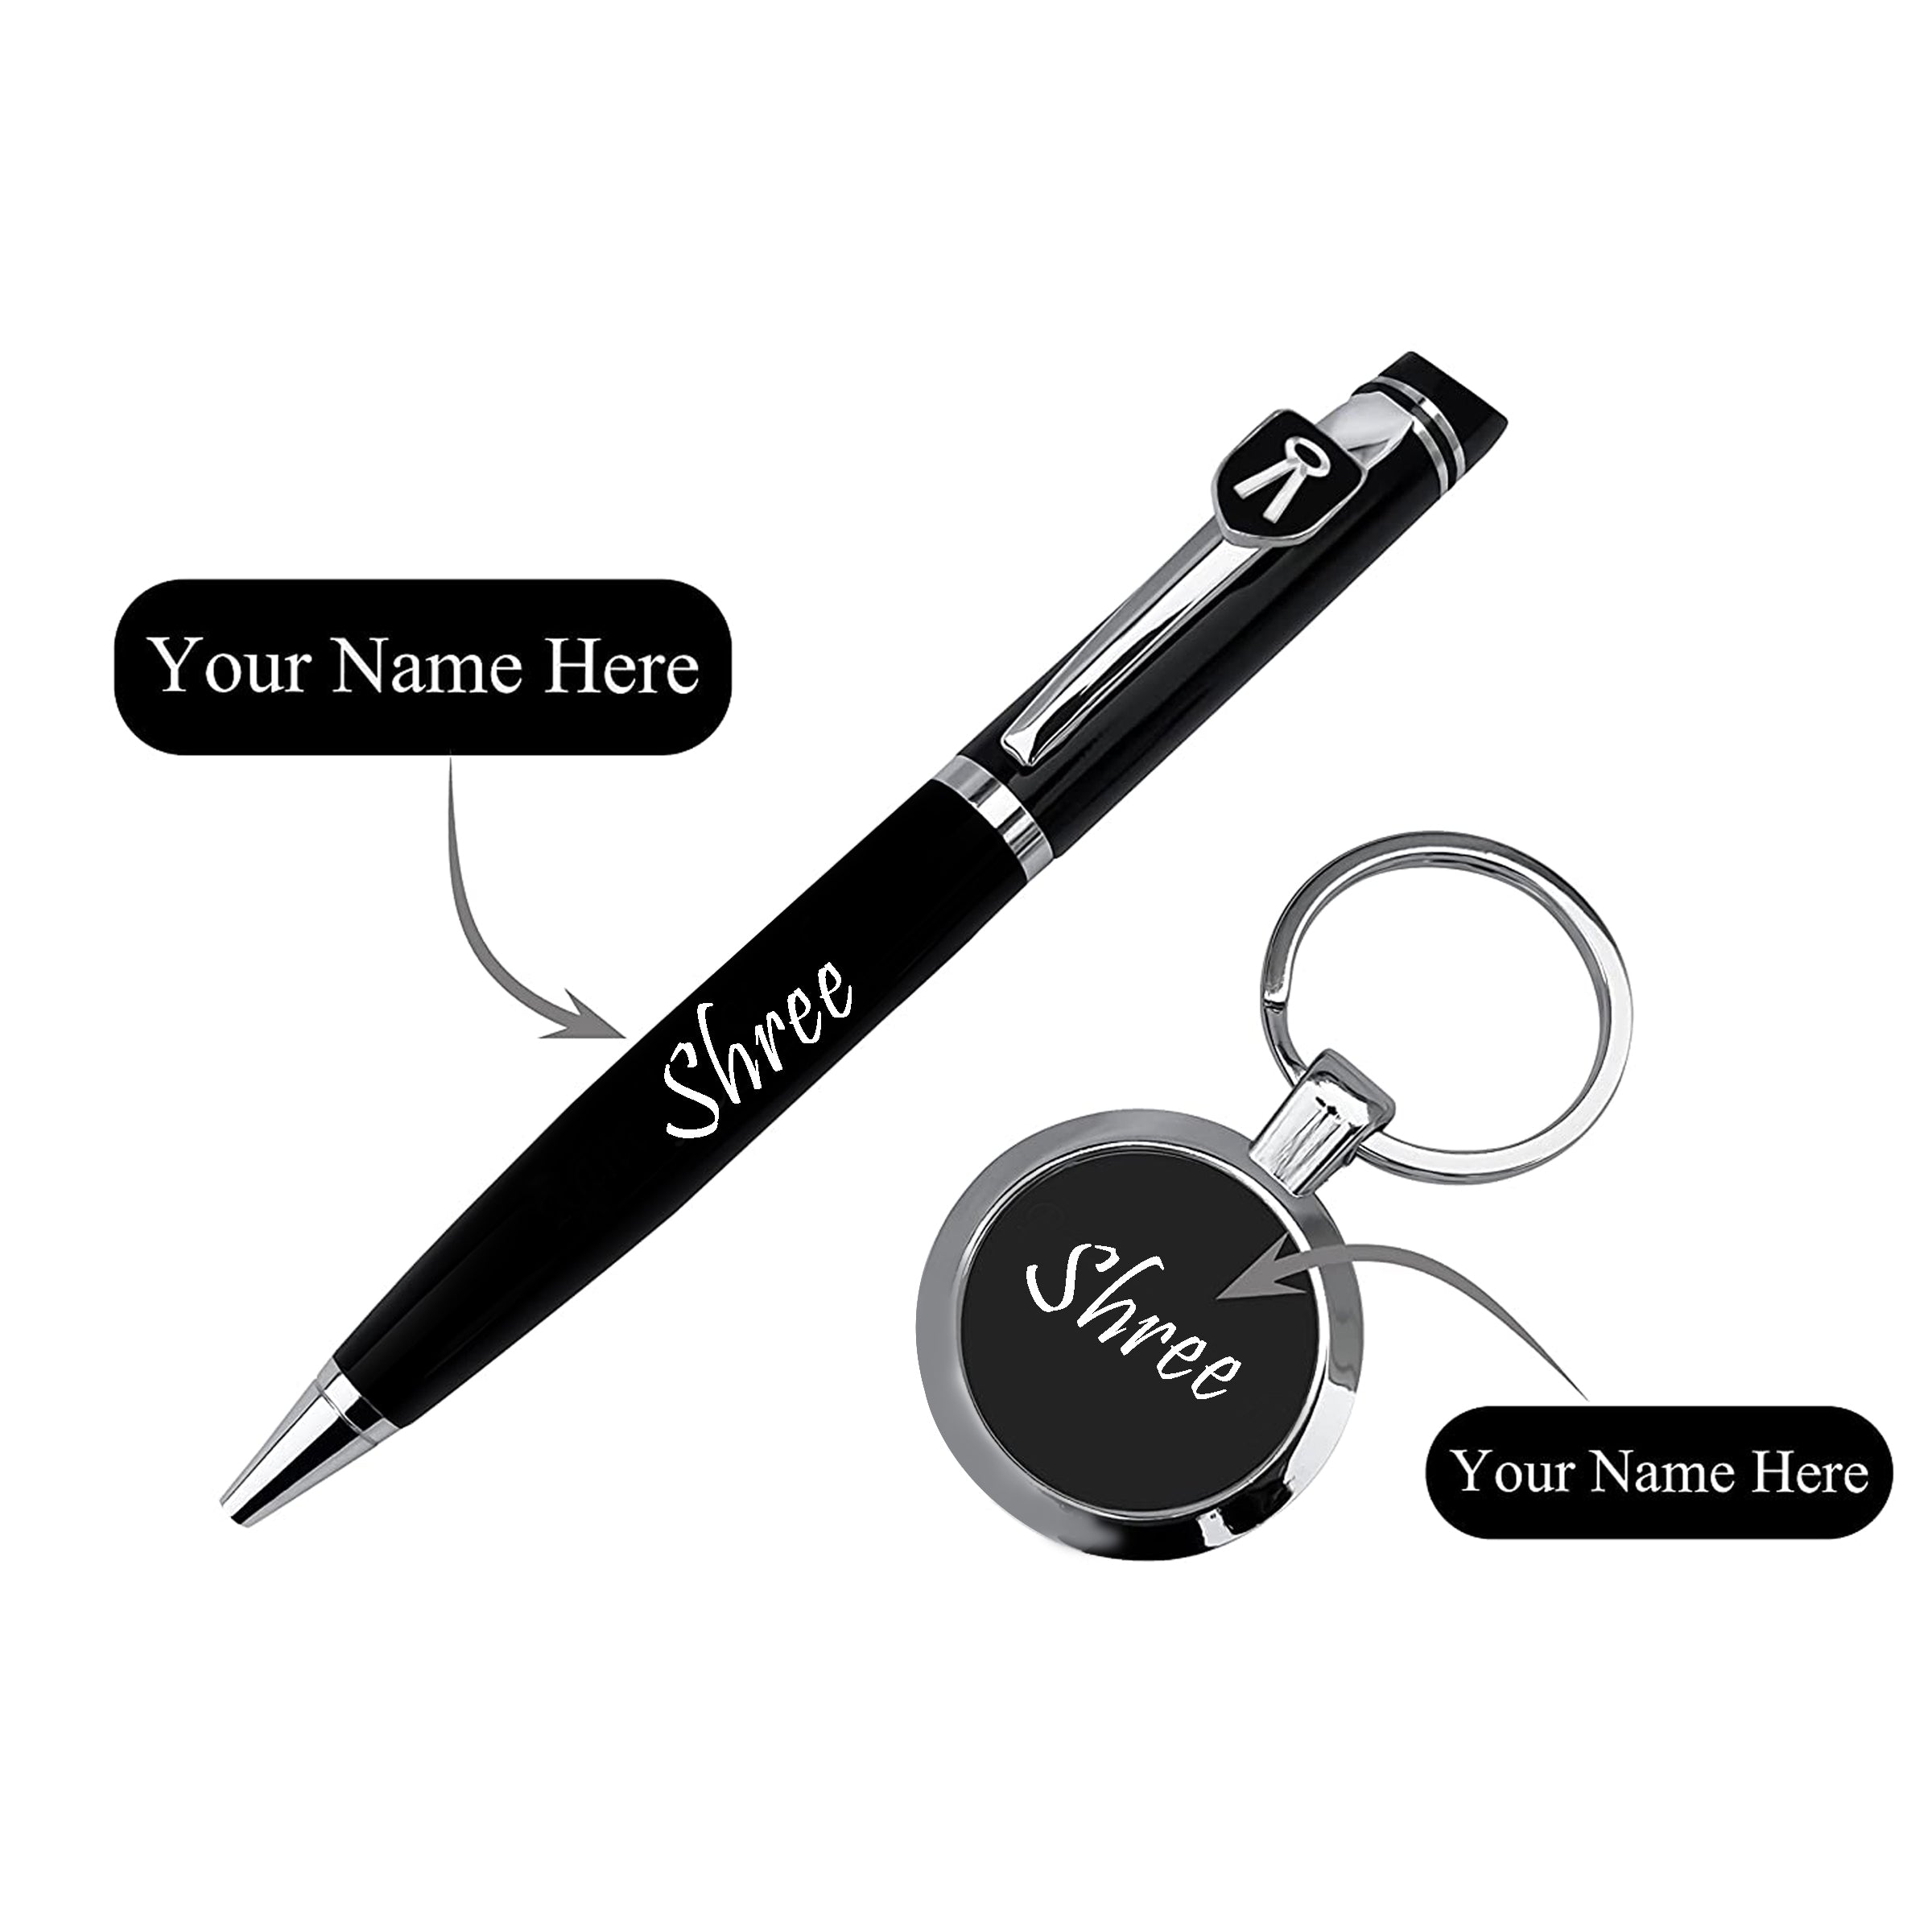 Wholesale Keychain & Pen Set: Ideal For Bulk Corporate Gifting